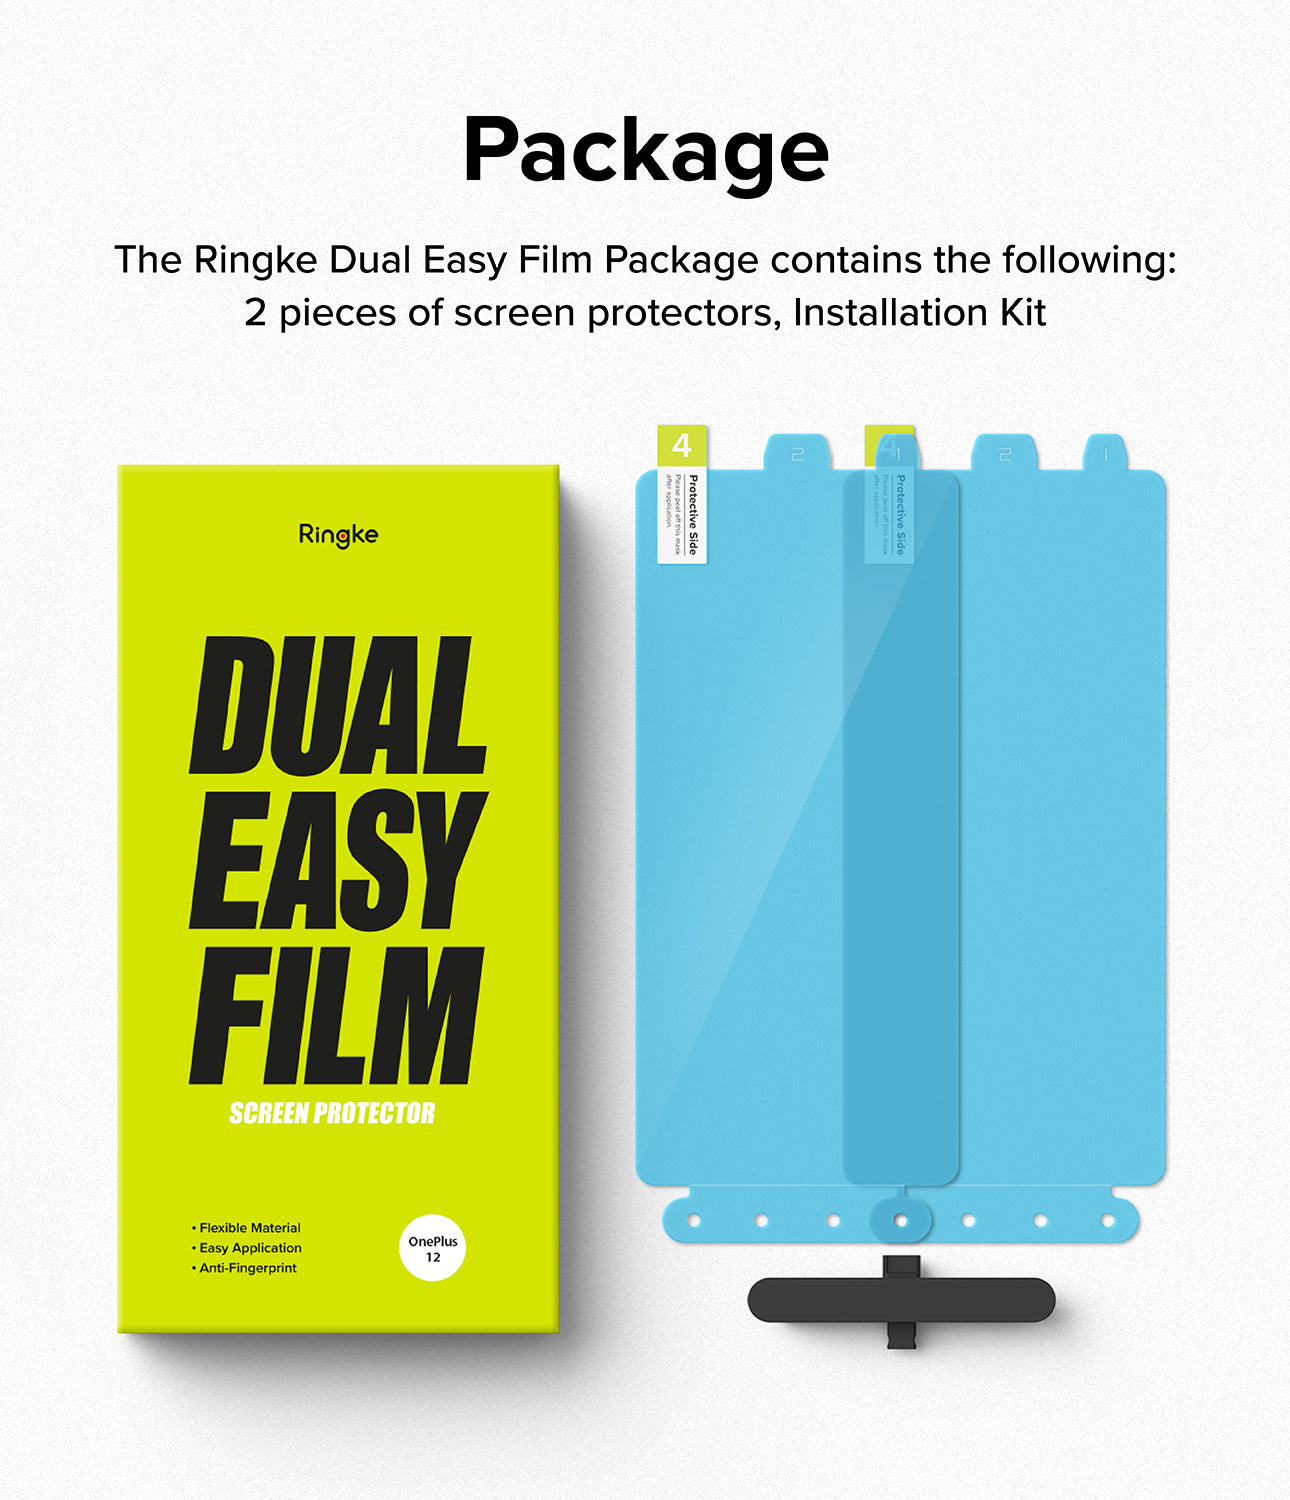 OnePlus 12 Screen Protector | Dual Easy Film [2 Pack]  - Package. The Ringke Dual Easy Film Package contains the following: 2 pieces of screen protectors, Installation Kit